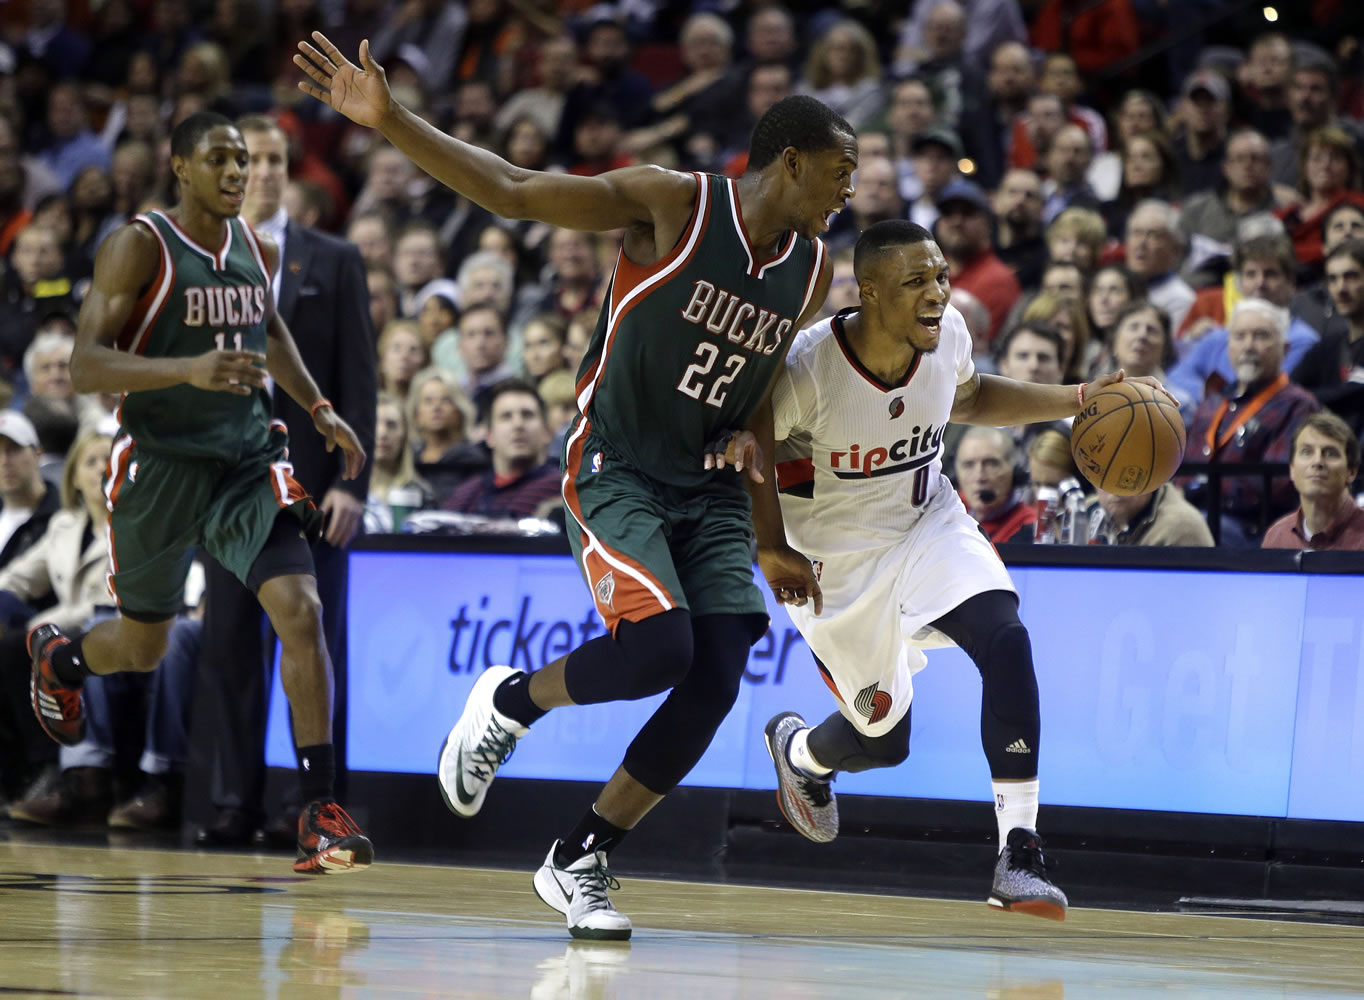 Portland Trail Blazers guard Damian Lillard, right, races downcourt against Milwaukee Bucks forward Khris Middleton during the second half of an NBA basketball game in Portland, Ore., Wednesday, Dec. 17, 2014. Lillard led the Trail Blazers in scoring with 29 points as they defeated the Bucks 104-97.